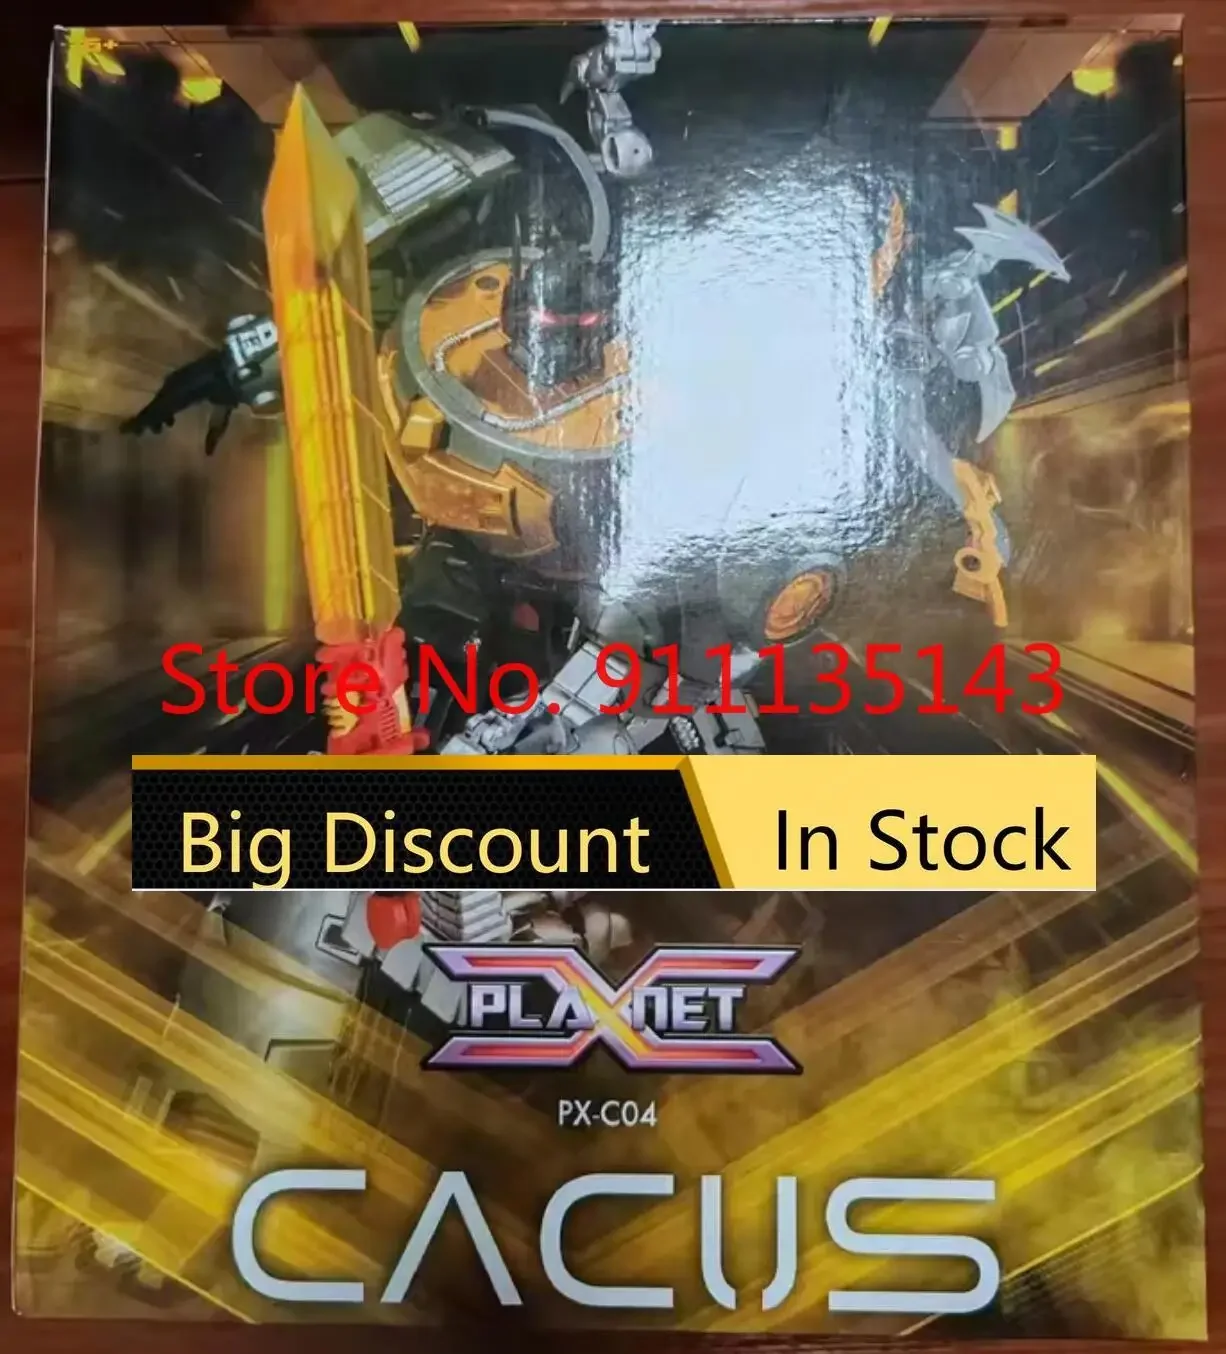 

Planet X Toys Px-C04 Cacus Comic Version In Stock